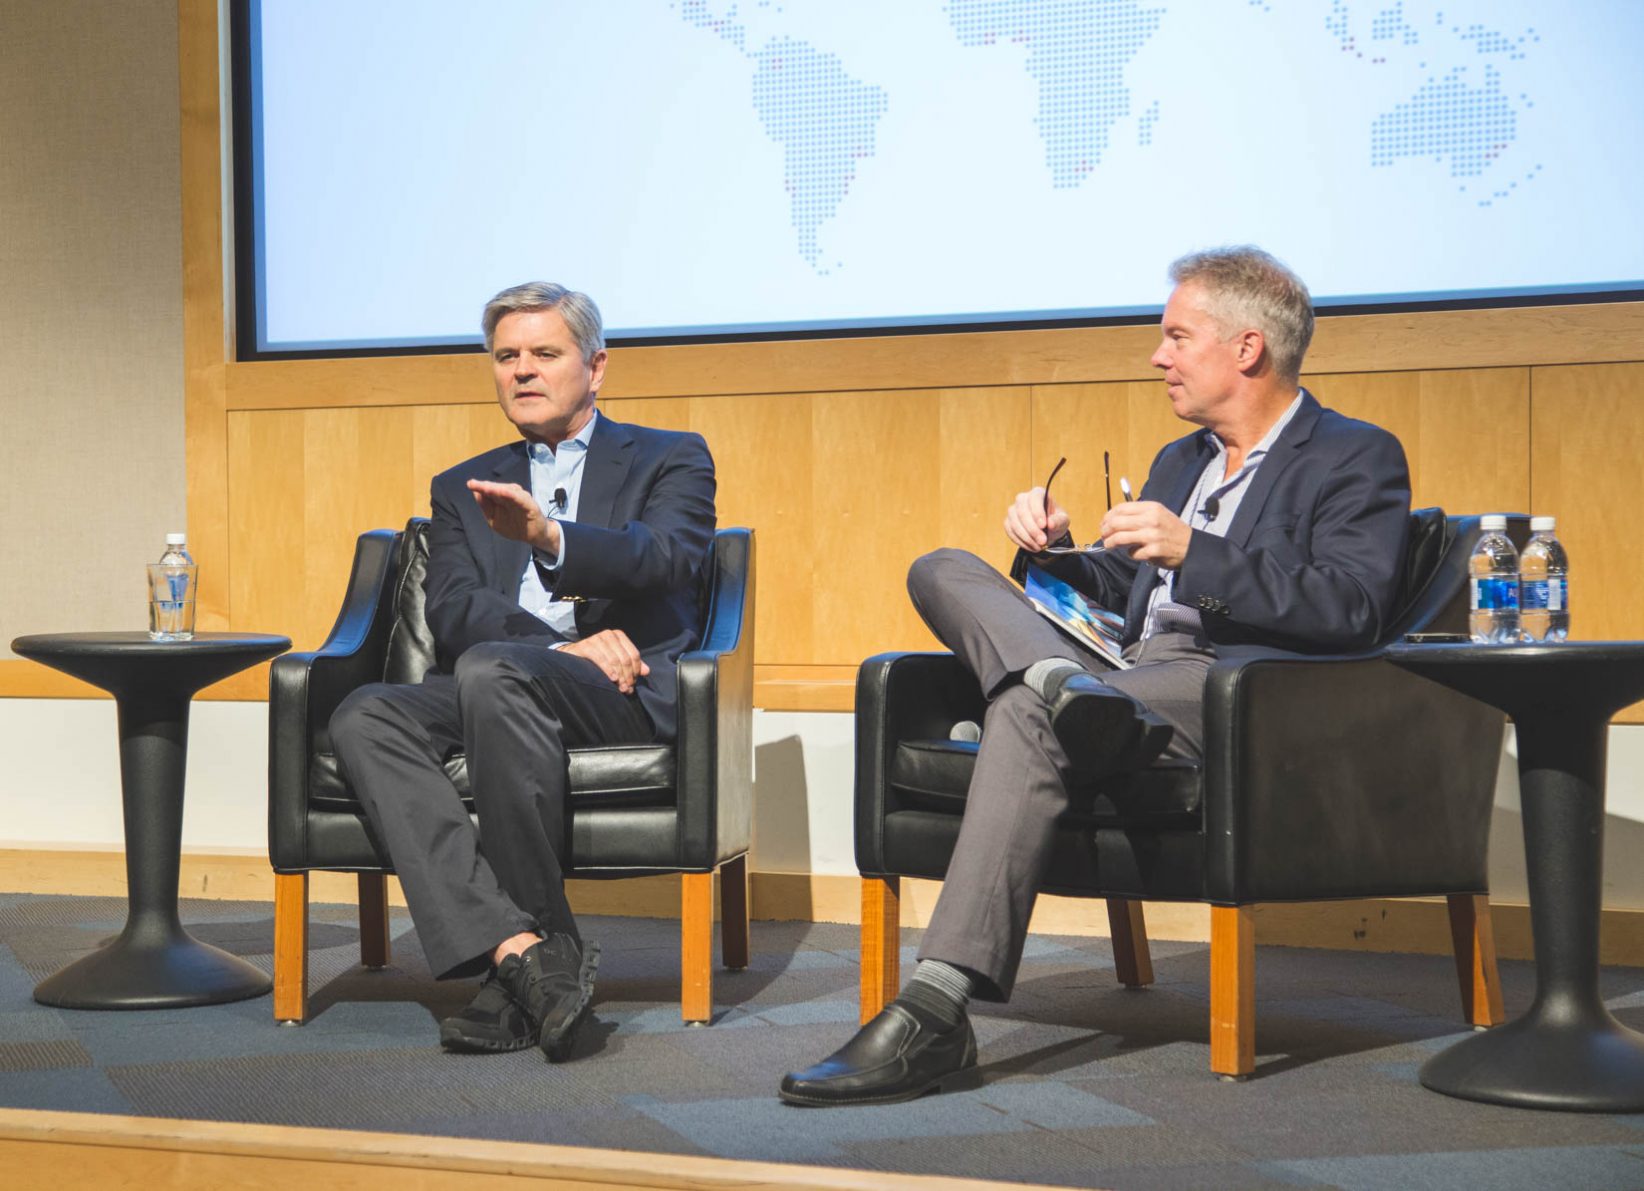 AOL founder Steve Case says innovators must become policy savvy